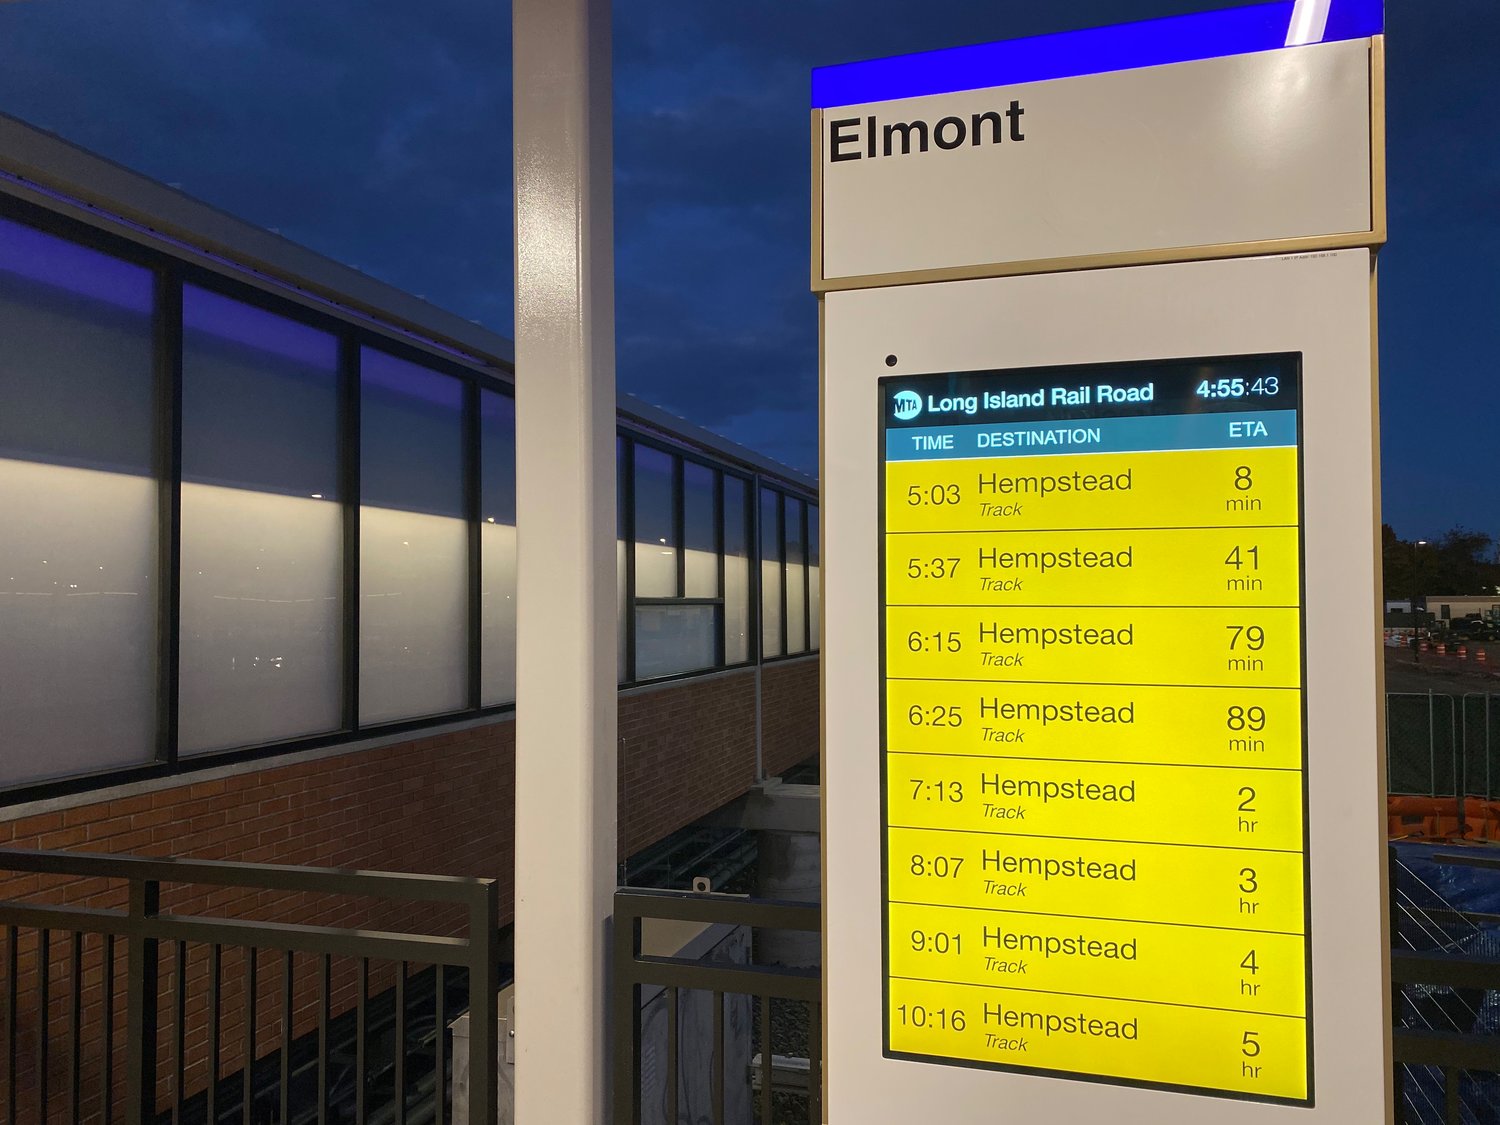 The new LIRR station in Elmont, which cost $105 million, opened on Nov. 16.